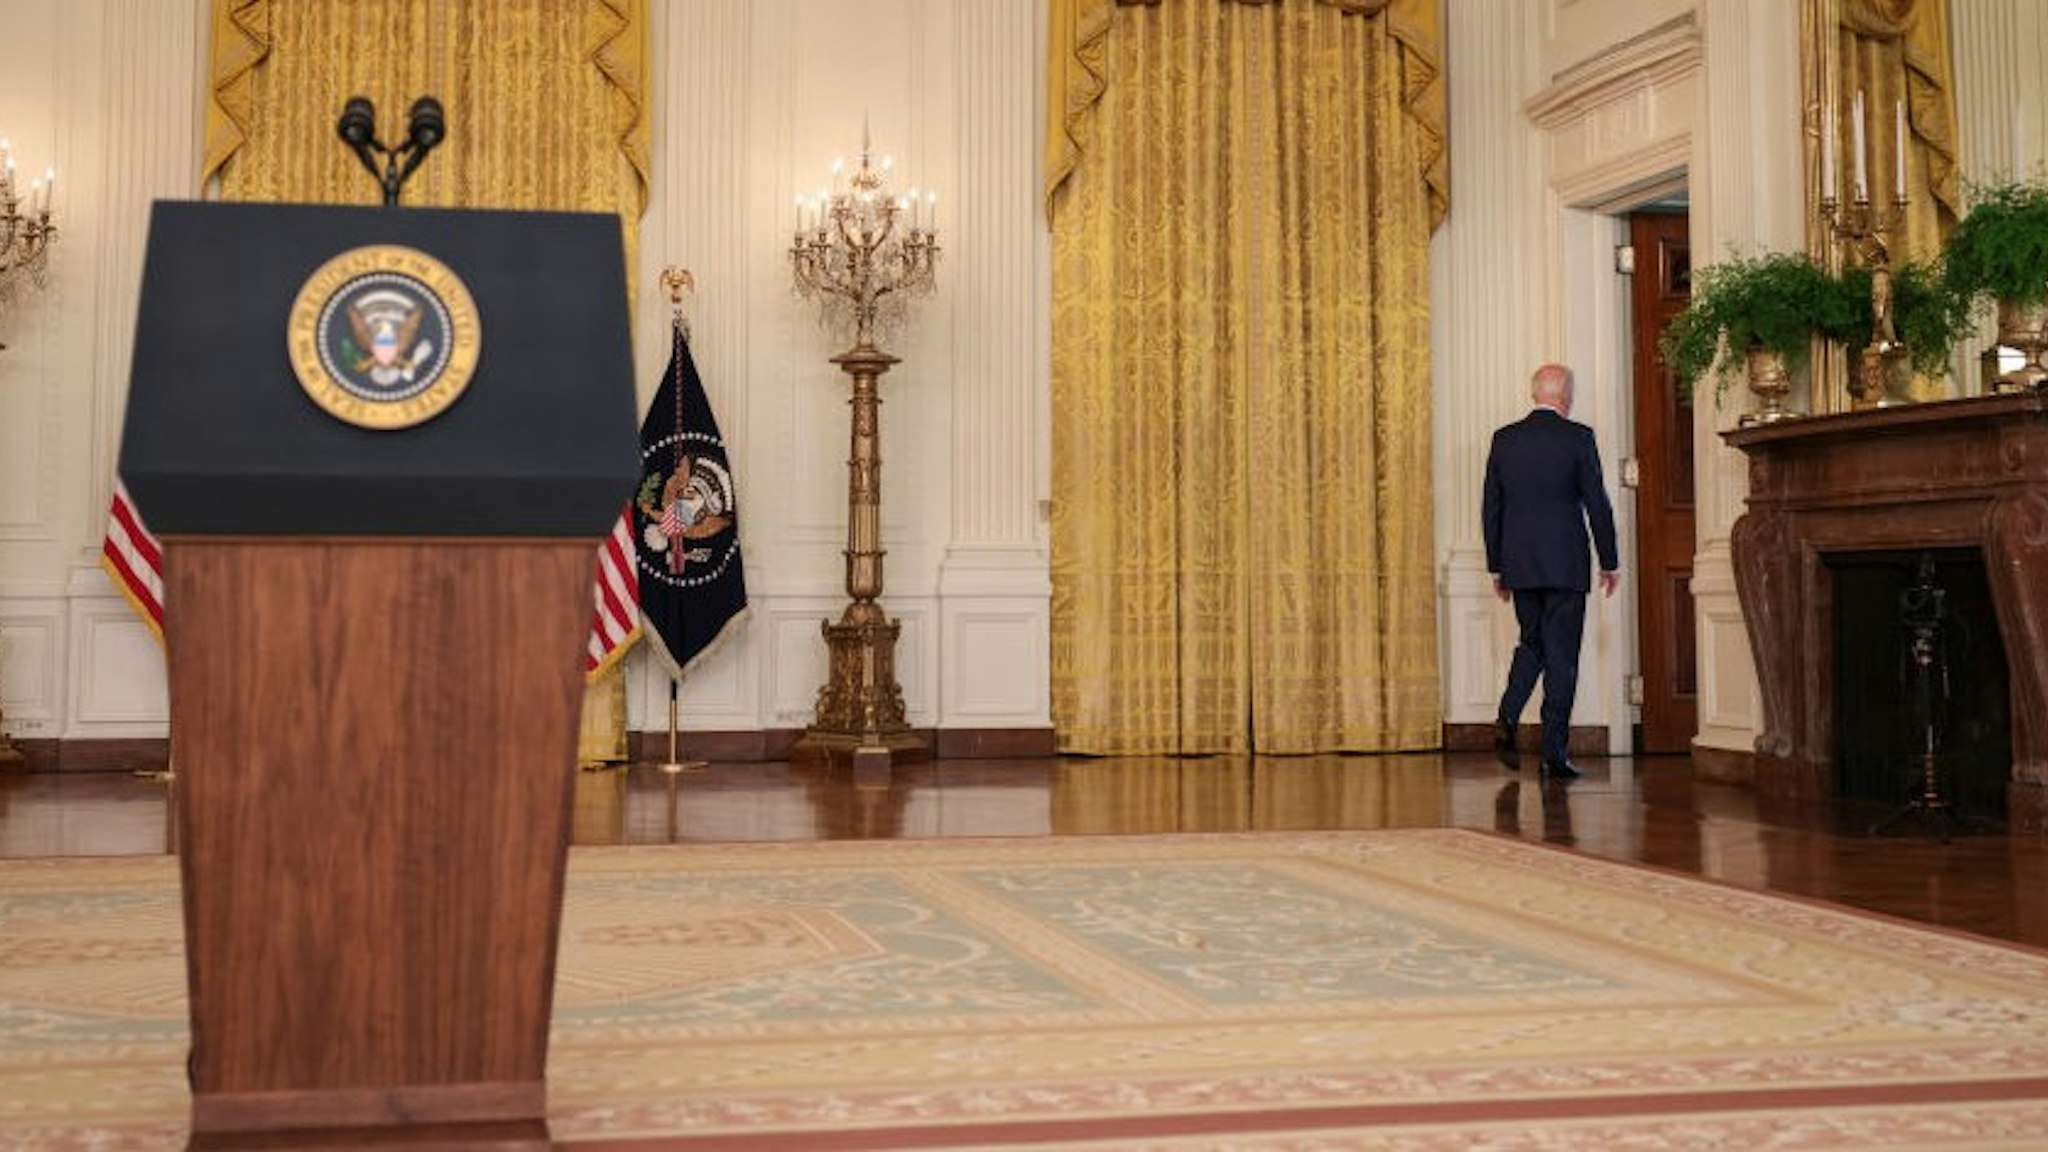 WASHINGTON, DC - SEPTEMBER 16: U.S President Joe Biden departs after speaking during an event in the East Room of the White House September 16, 2021 in Washington, DC. Biden spoke about the U.S. economy during the event. (Photo by